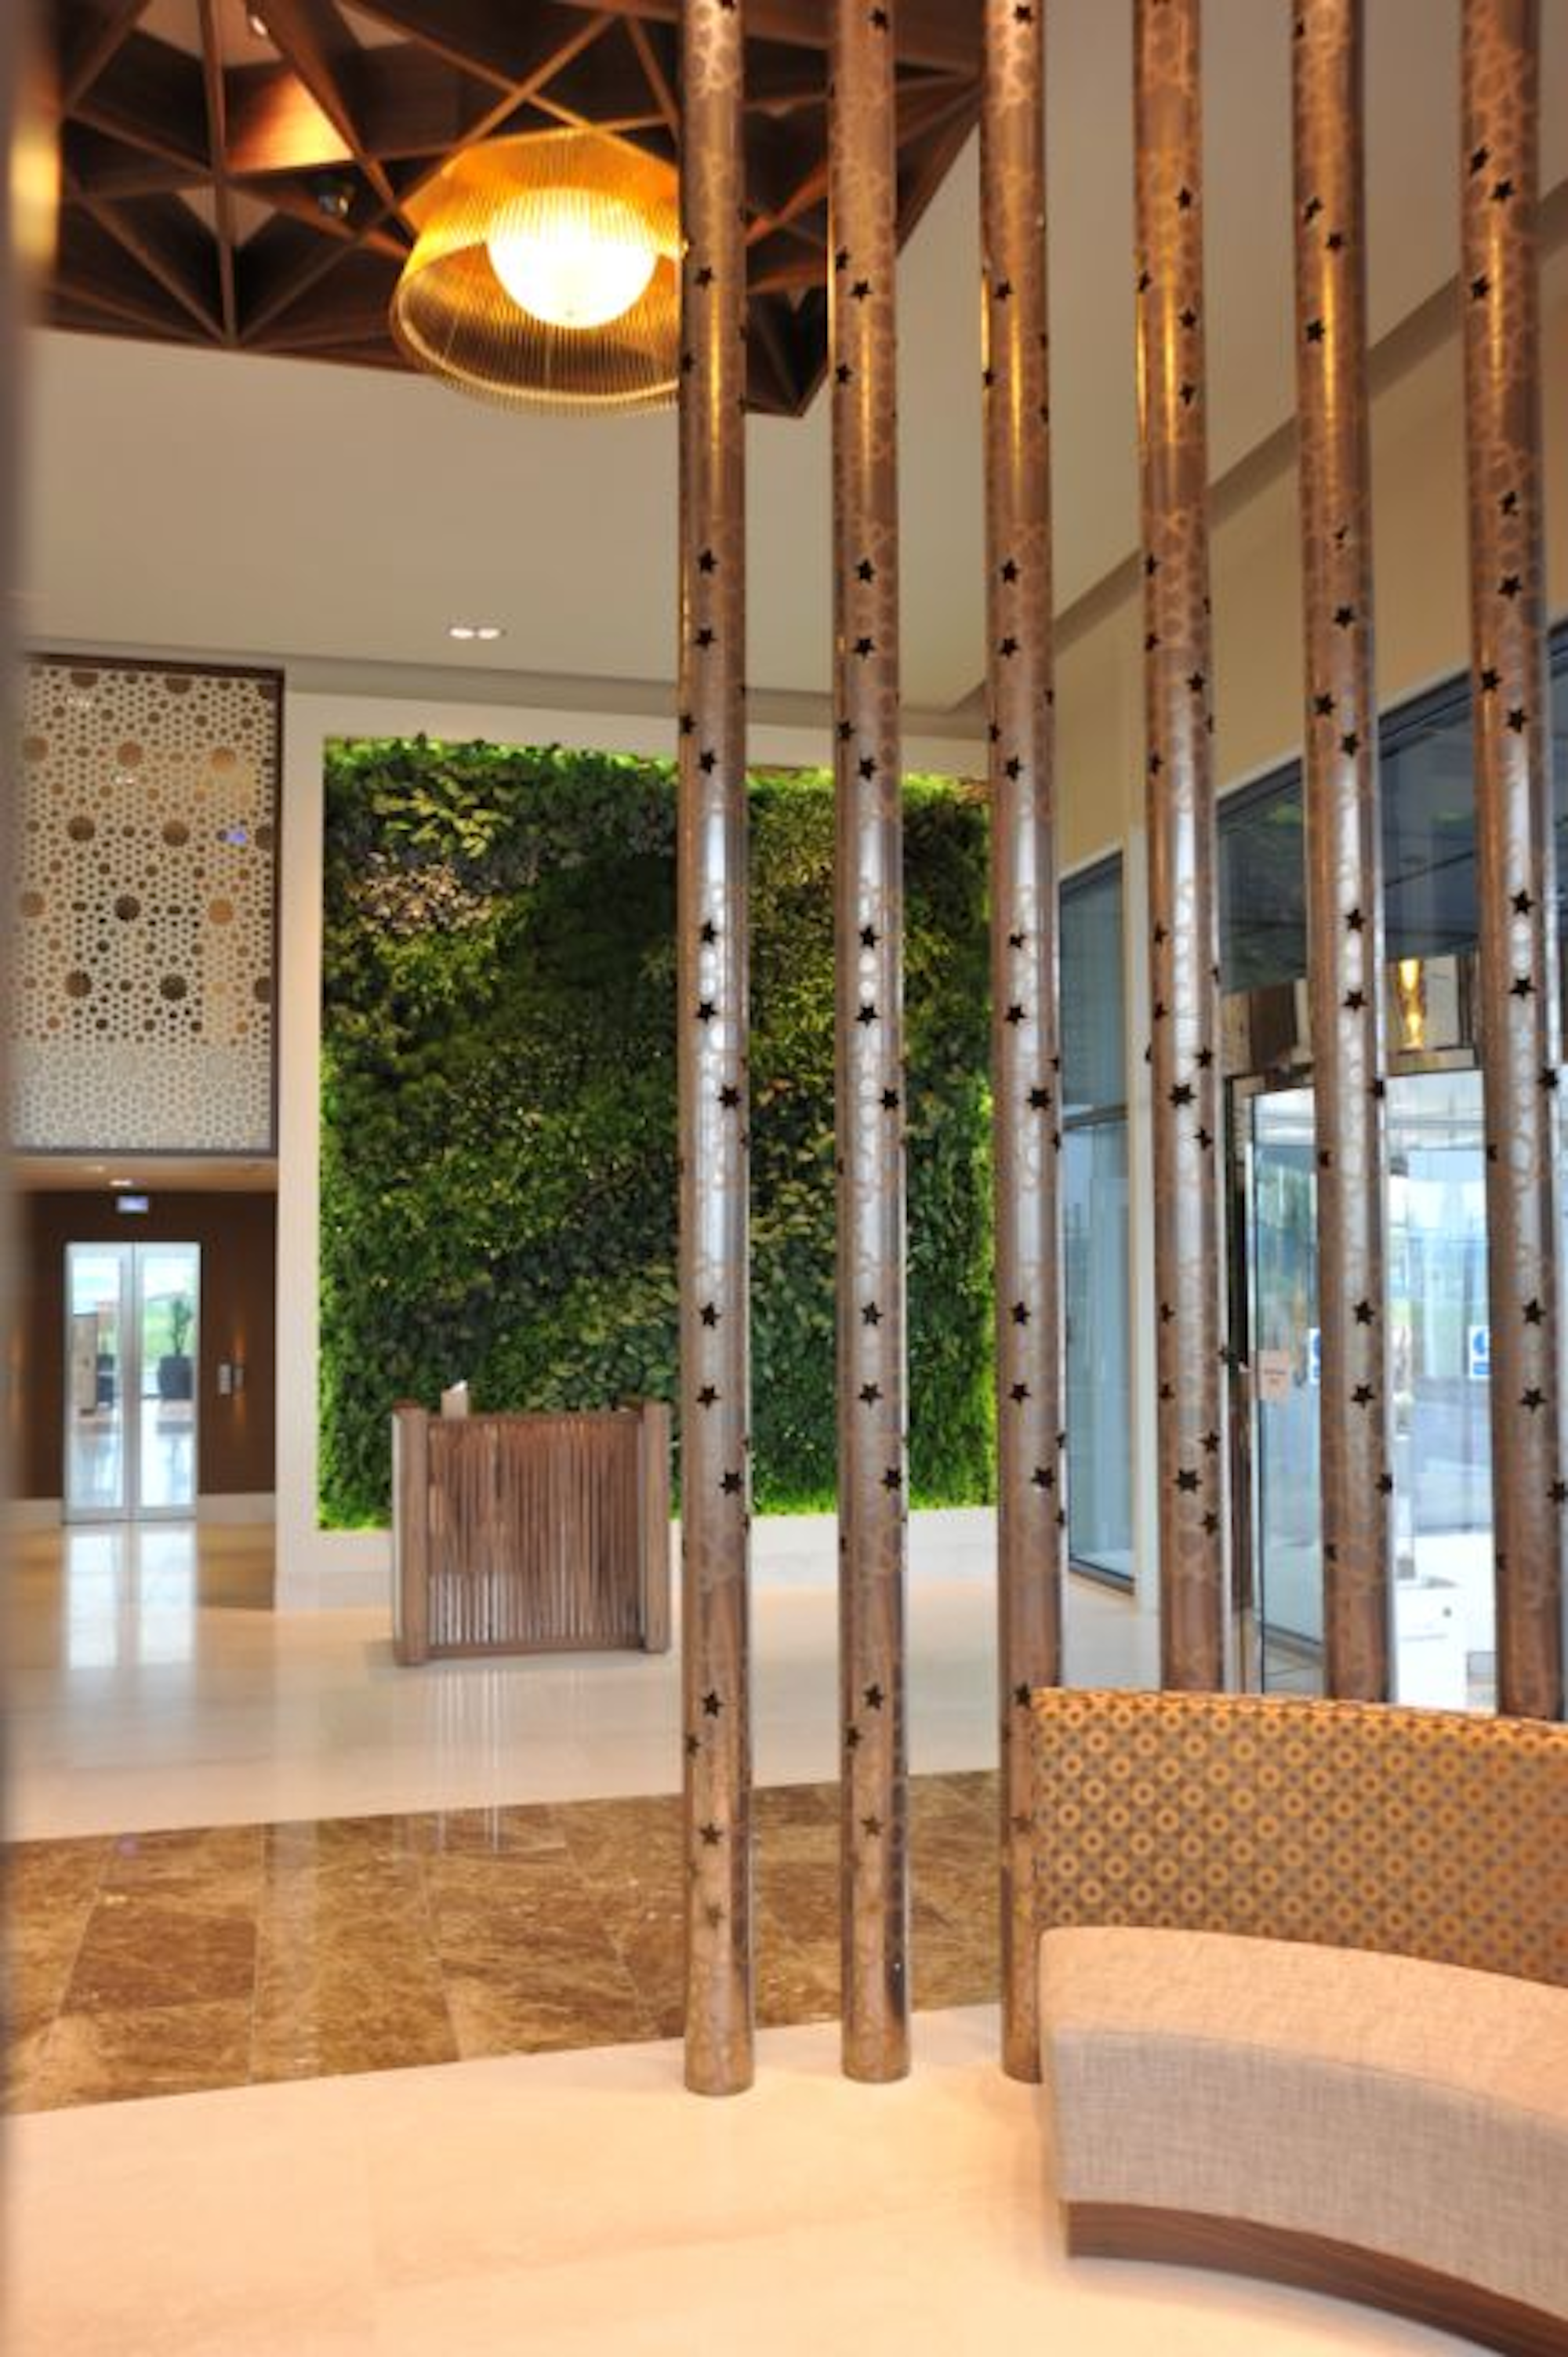 luxurious airport lounge with a living natural vertical garden in the background behind the reception desk